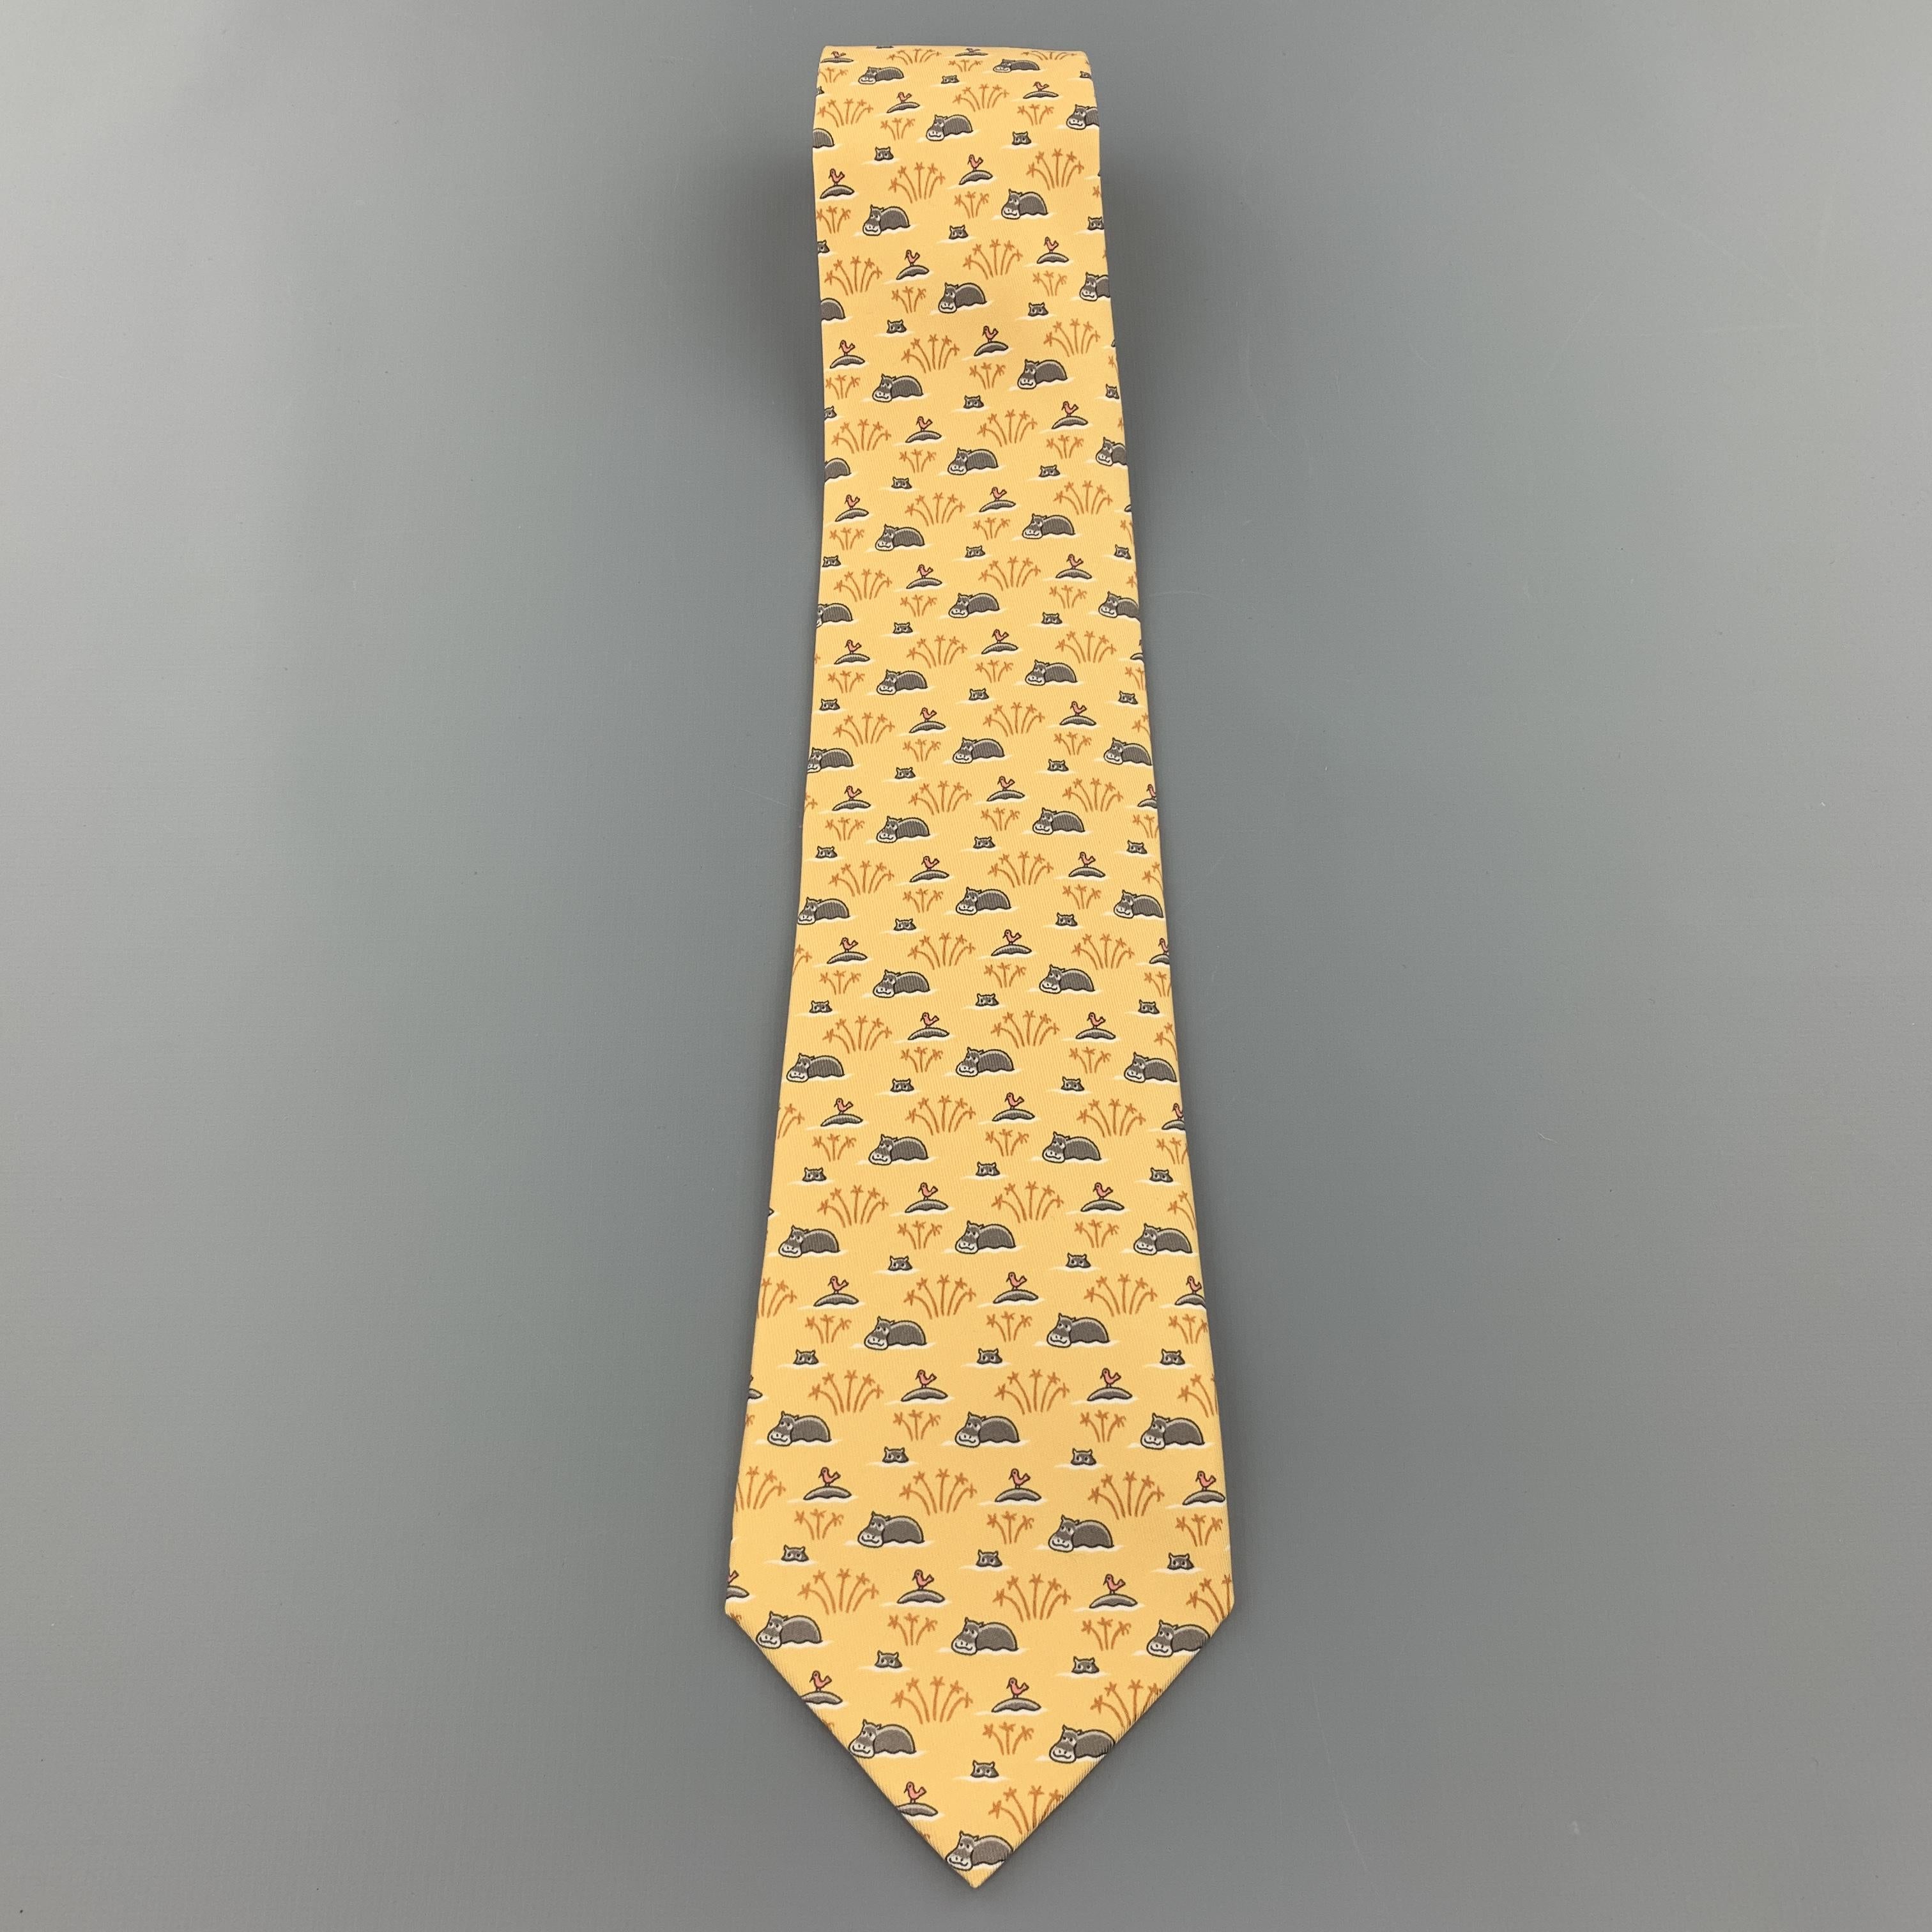 HERMES necktie comes in yellow silk twill with all over hippopotamus print. Made in France.

Excellent Pre-Owned Condition.

Width: 3.75 in.